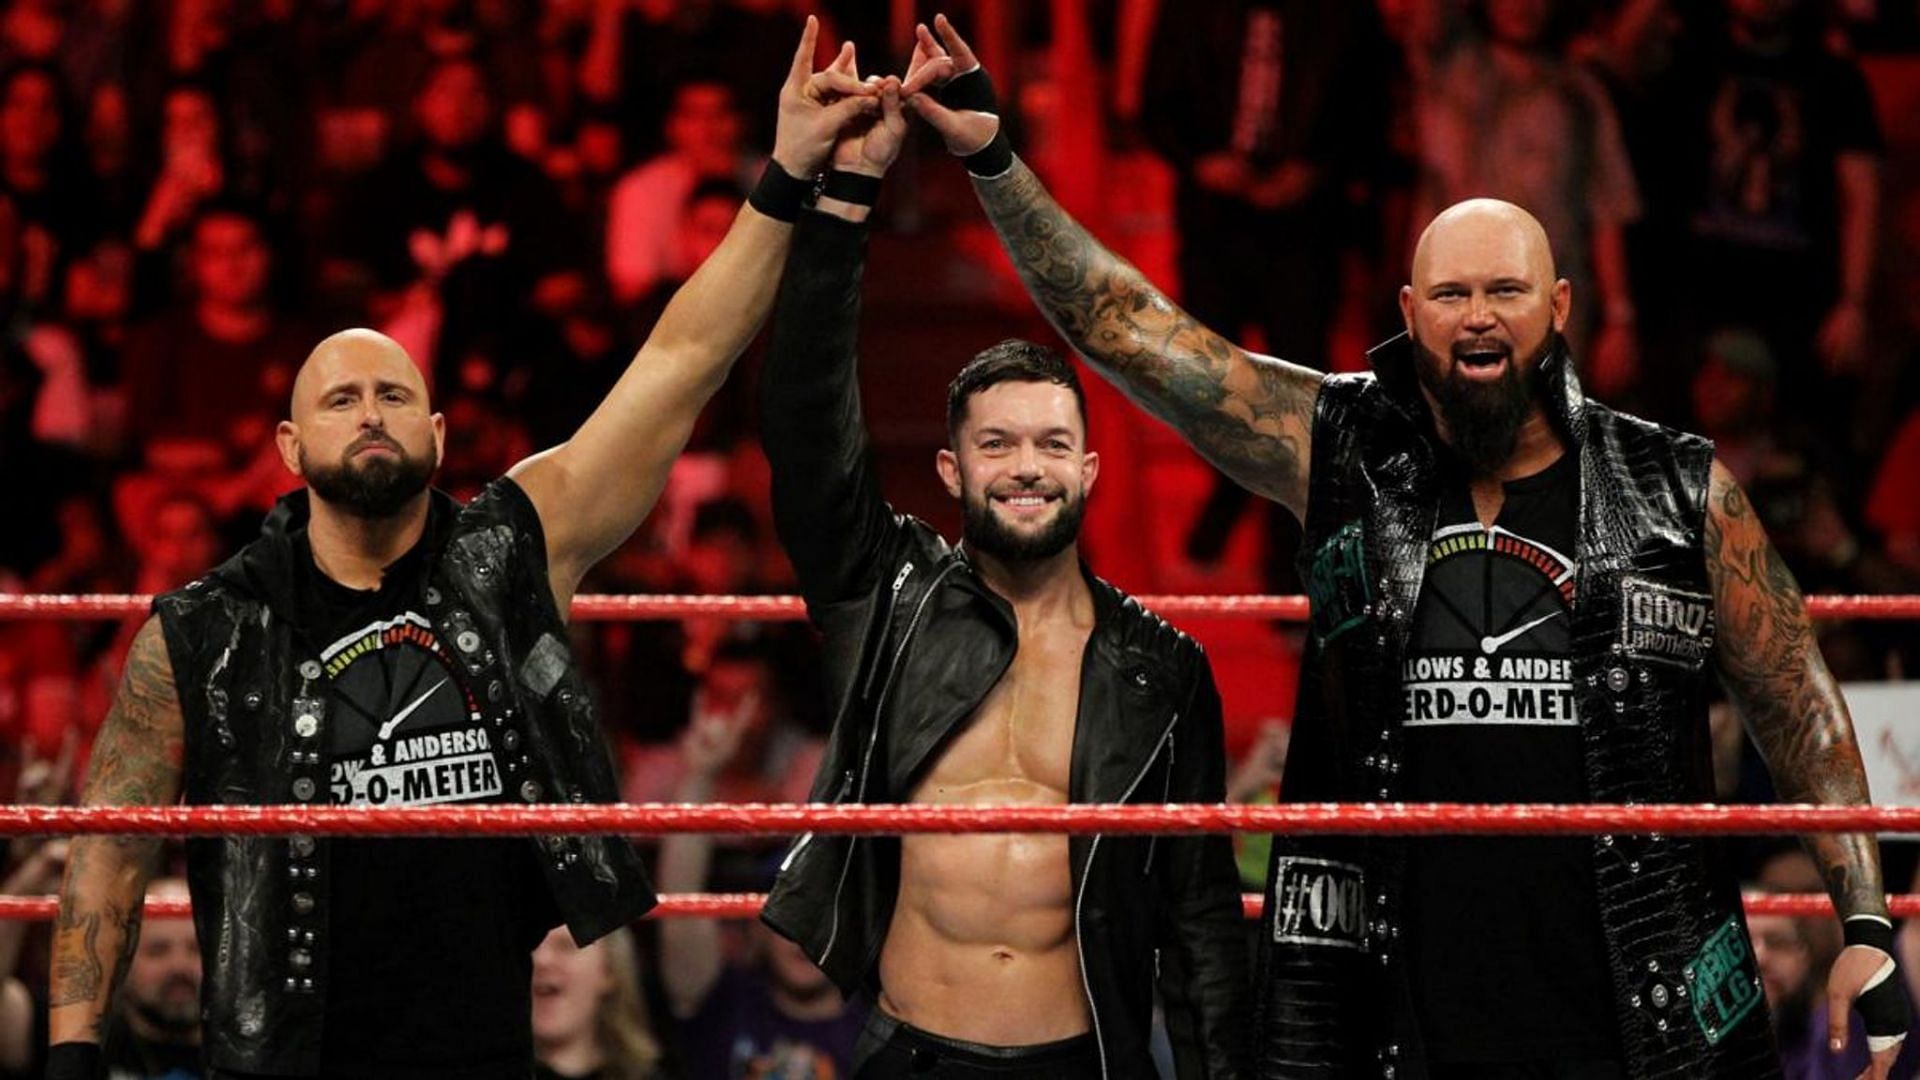 The Good Brothers are back to haunt Finn Balor